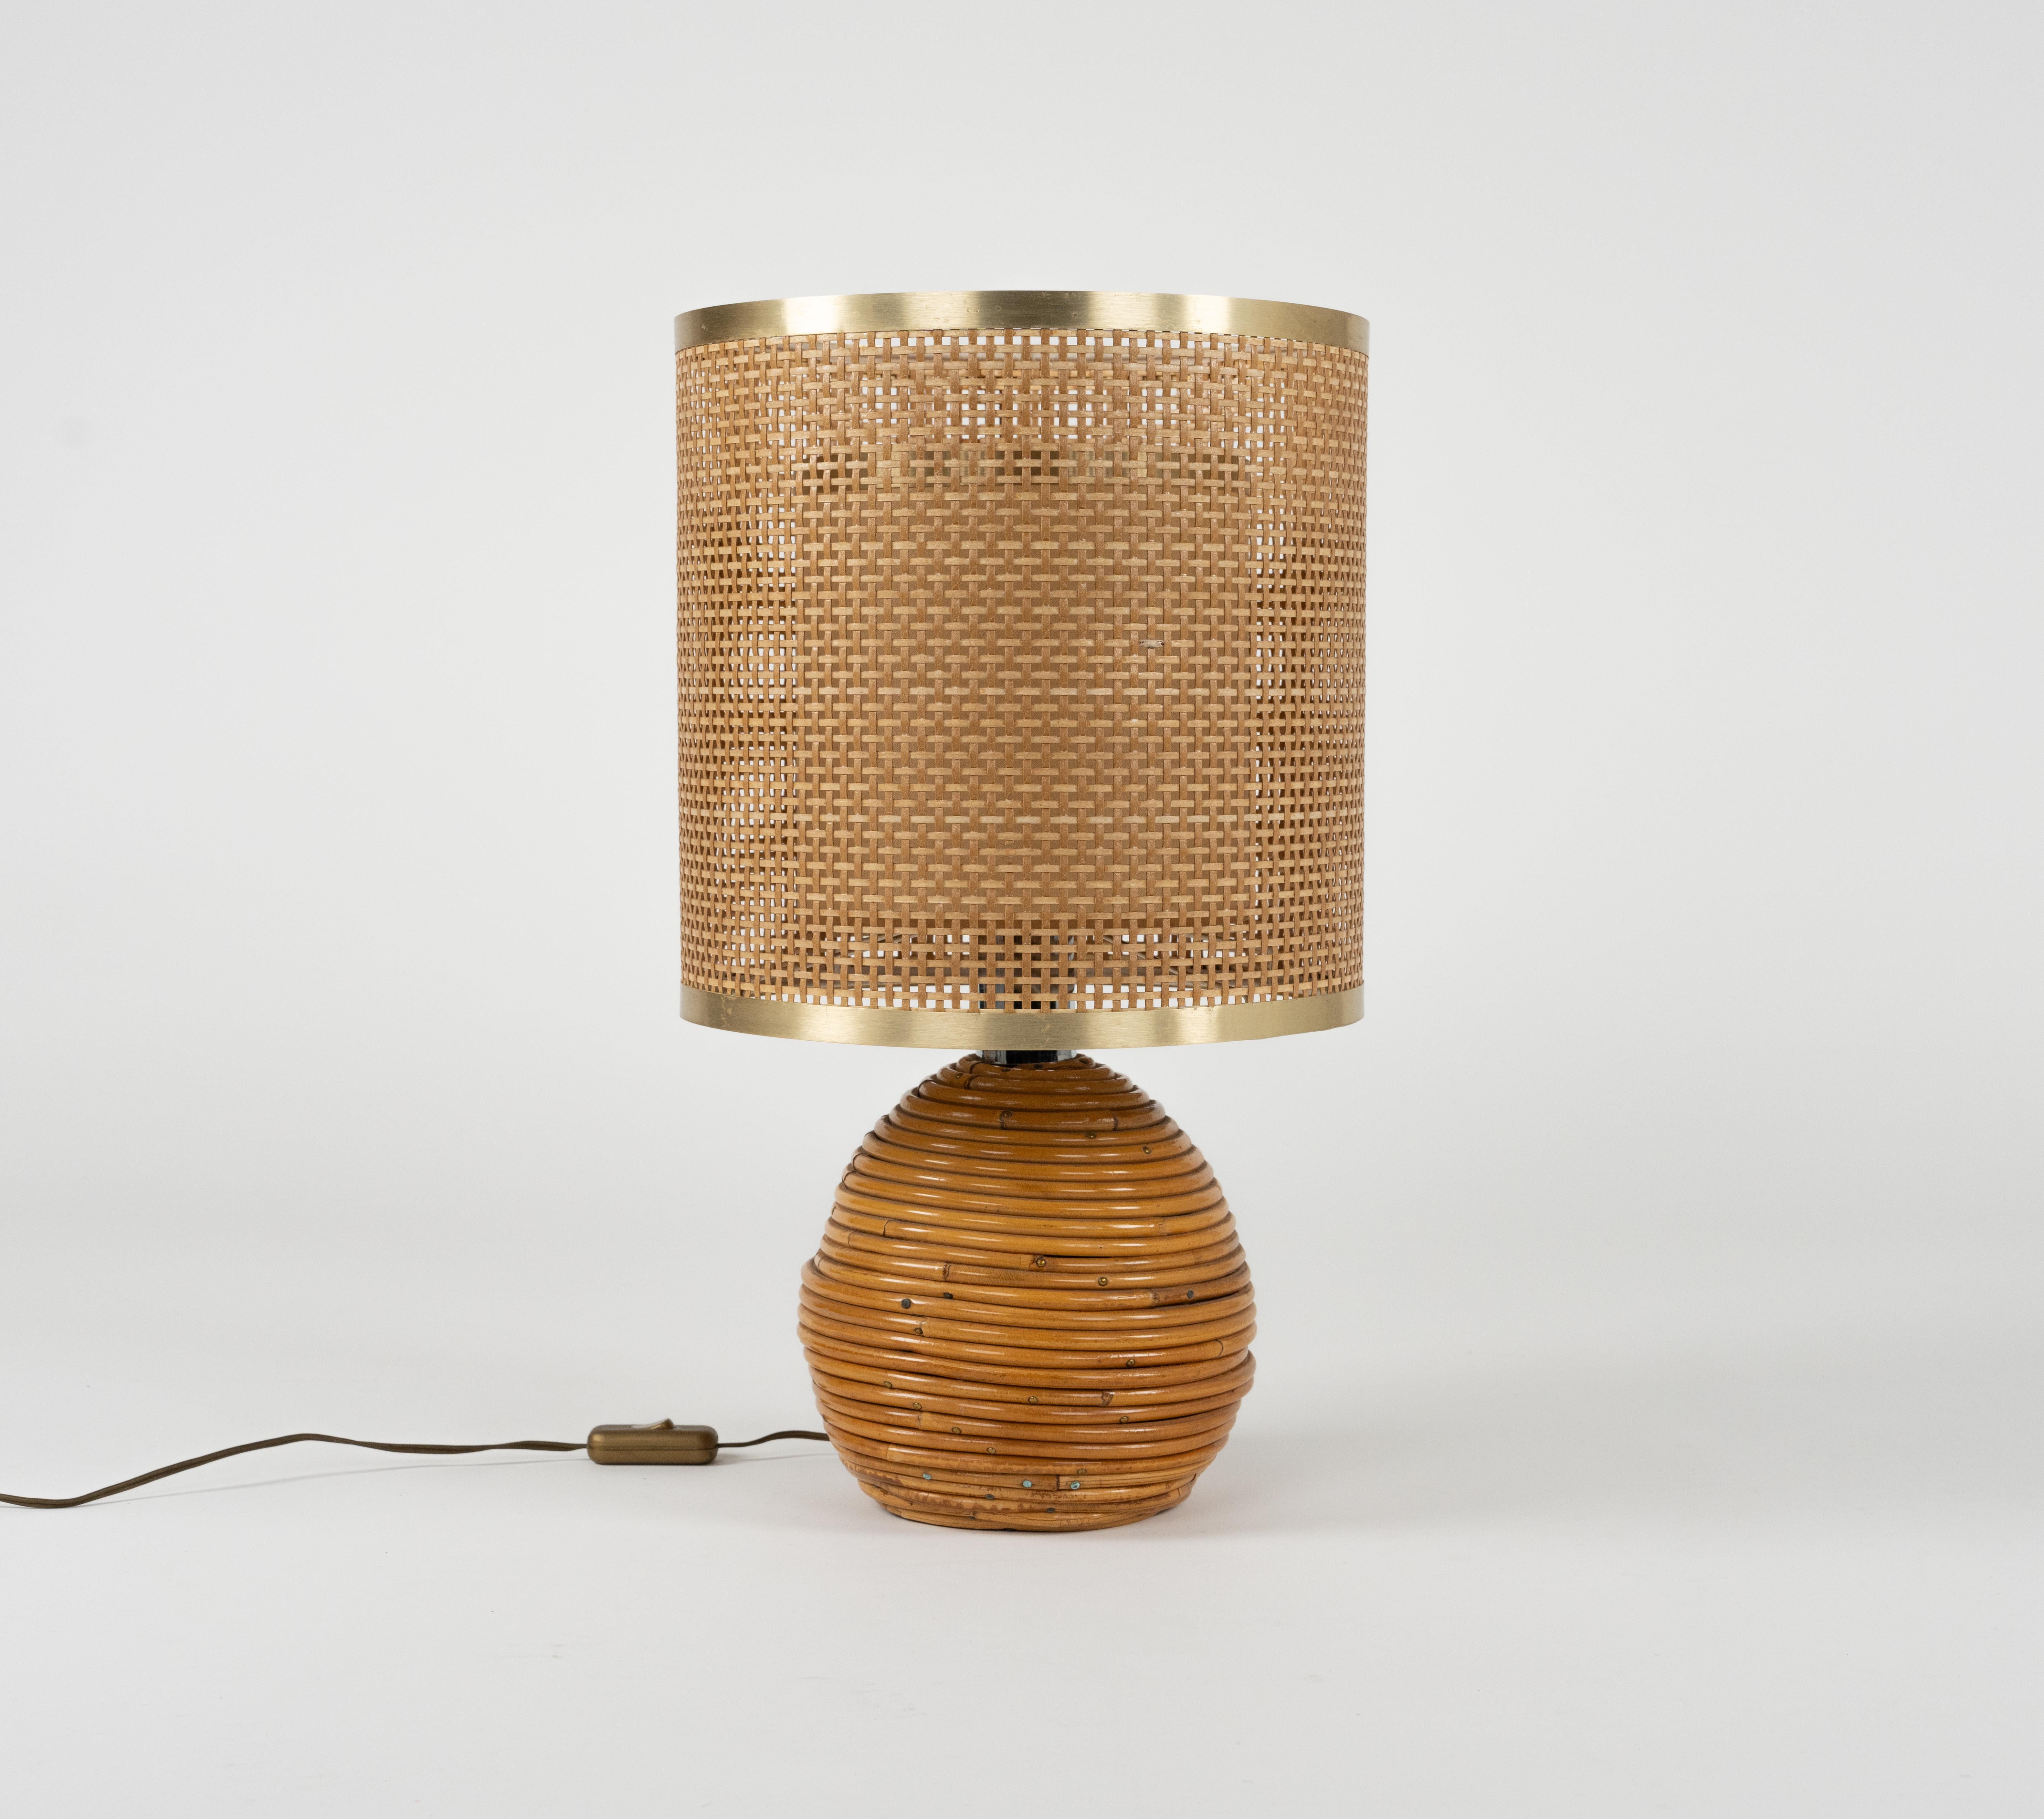 Midcentury Rattan, Wicker and Chrome Table Lamp by Vivai Del Sud, Italy 1970s In Good Condition For Sale In Rome, IT